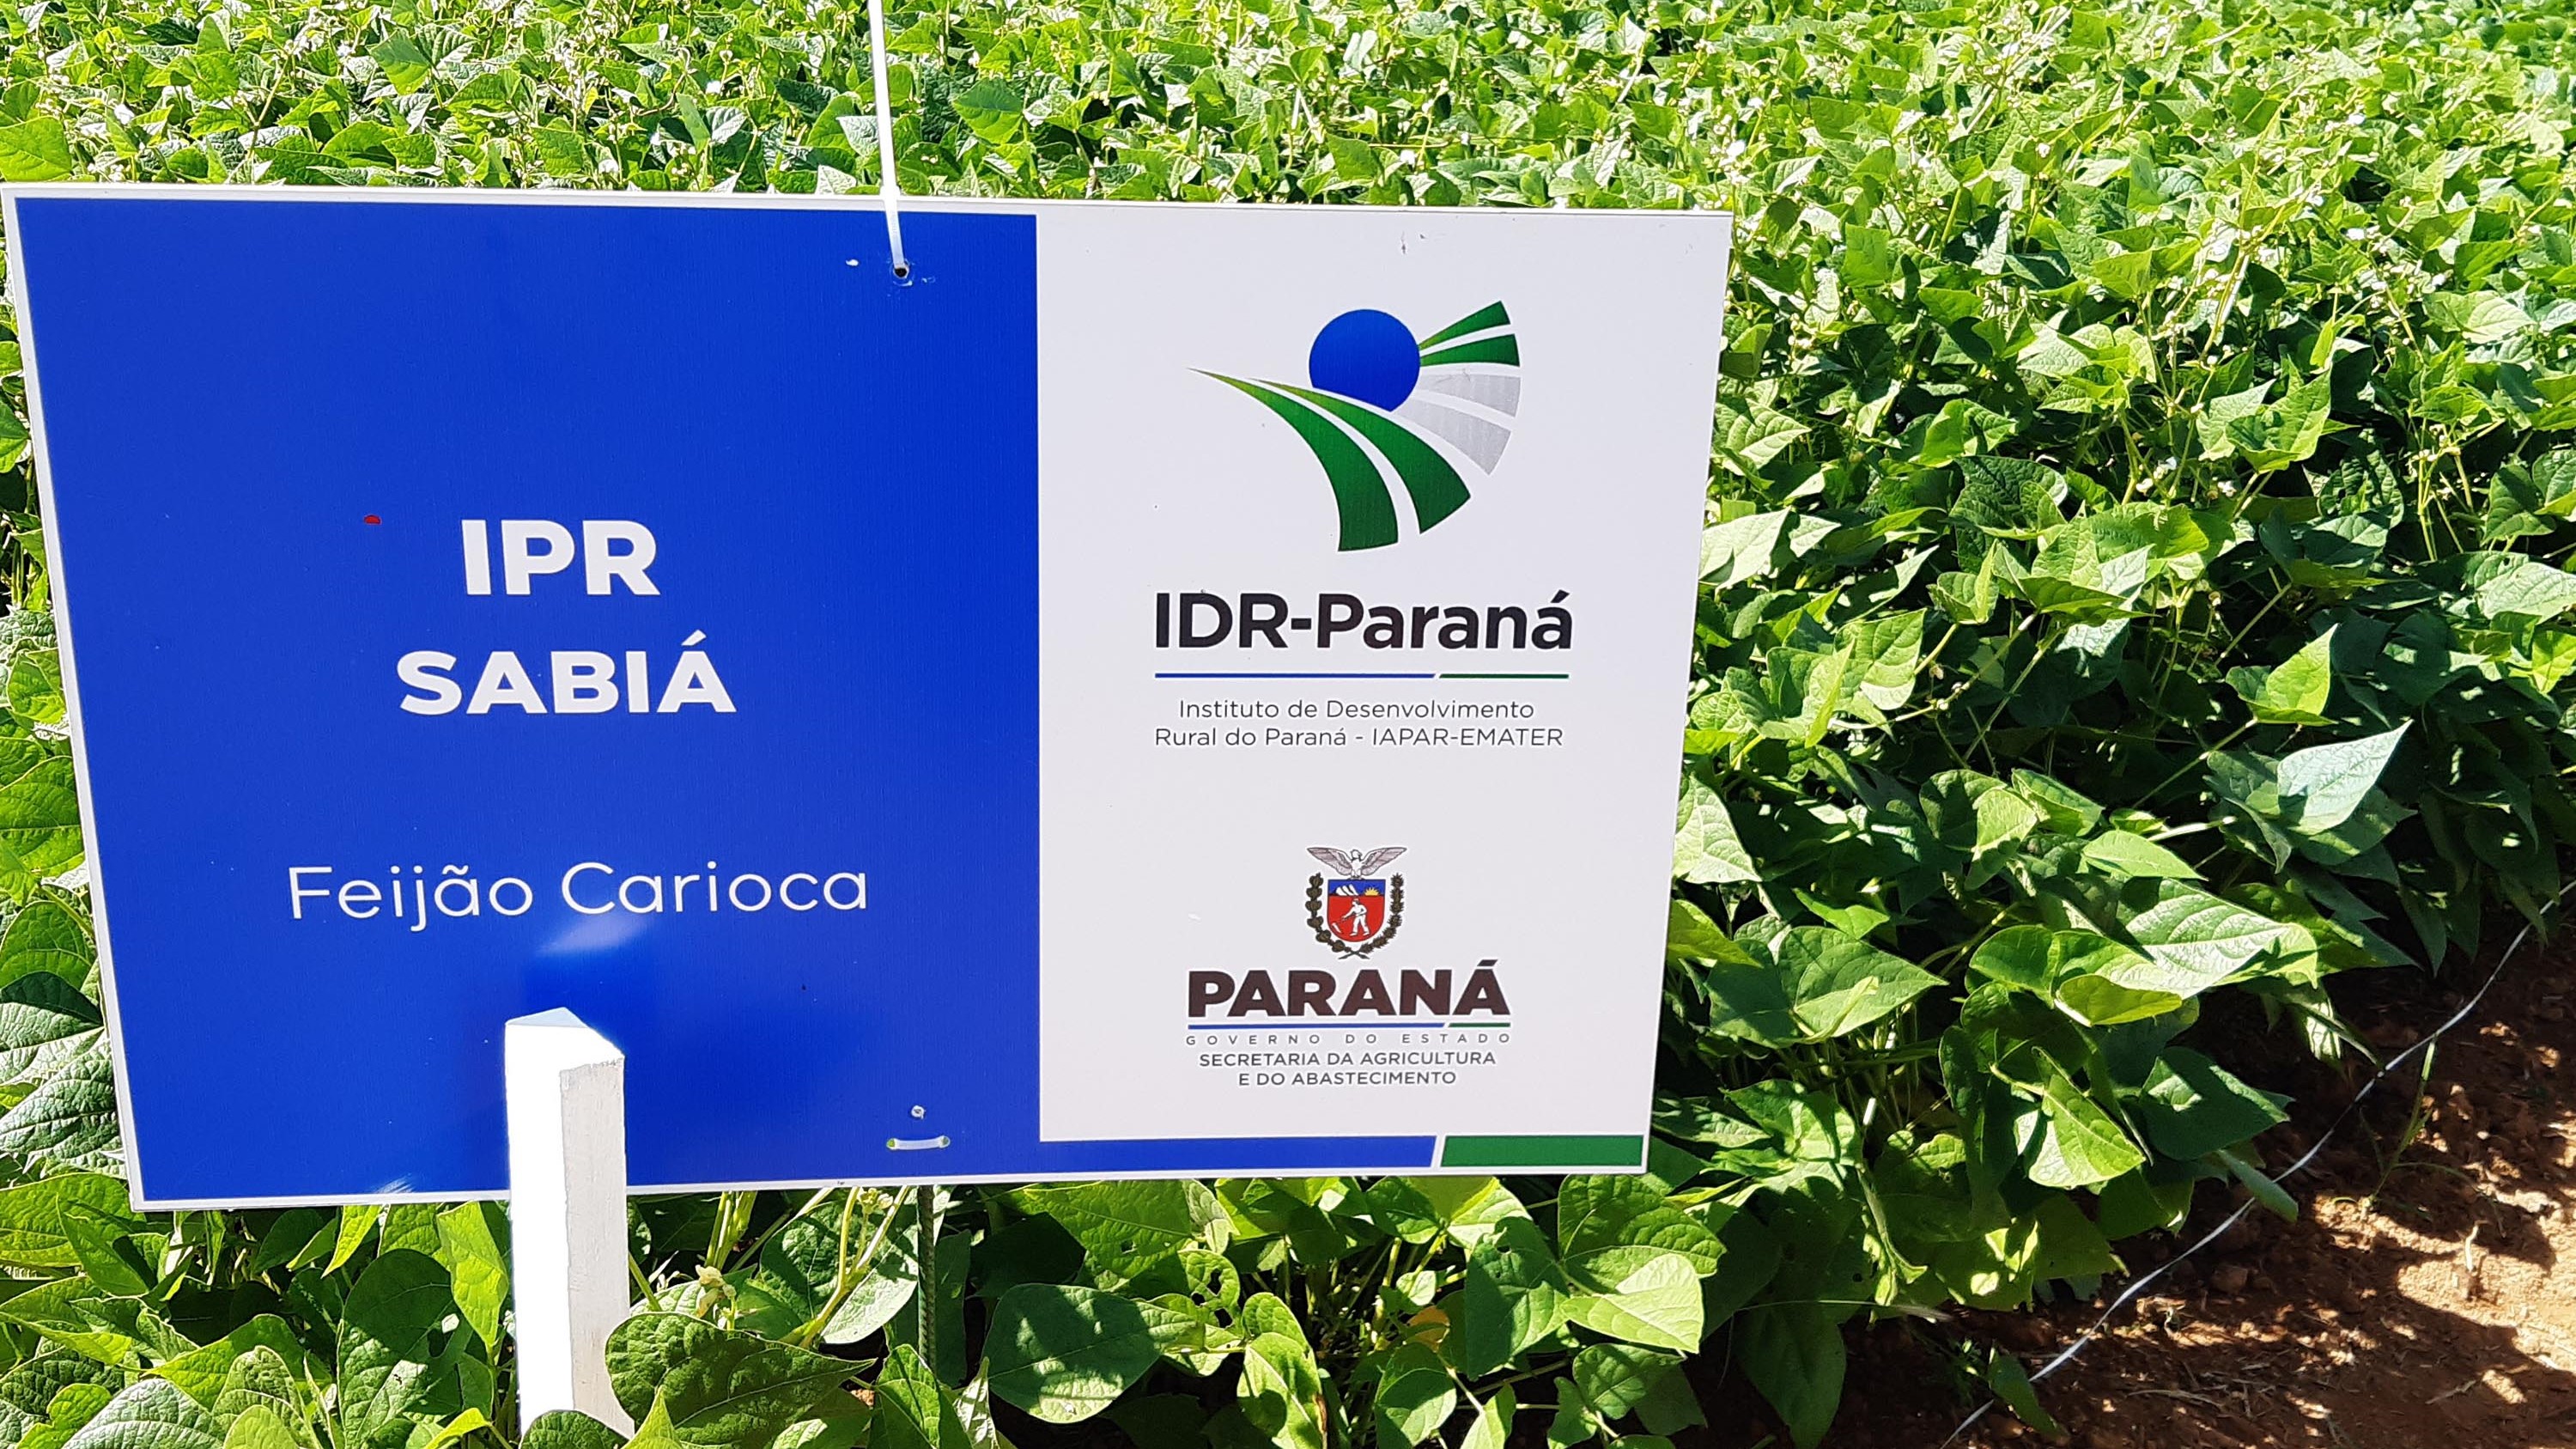 IDR-Paraná is responsible for two of the most commercialized bean cultivars in Brazil